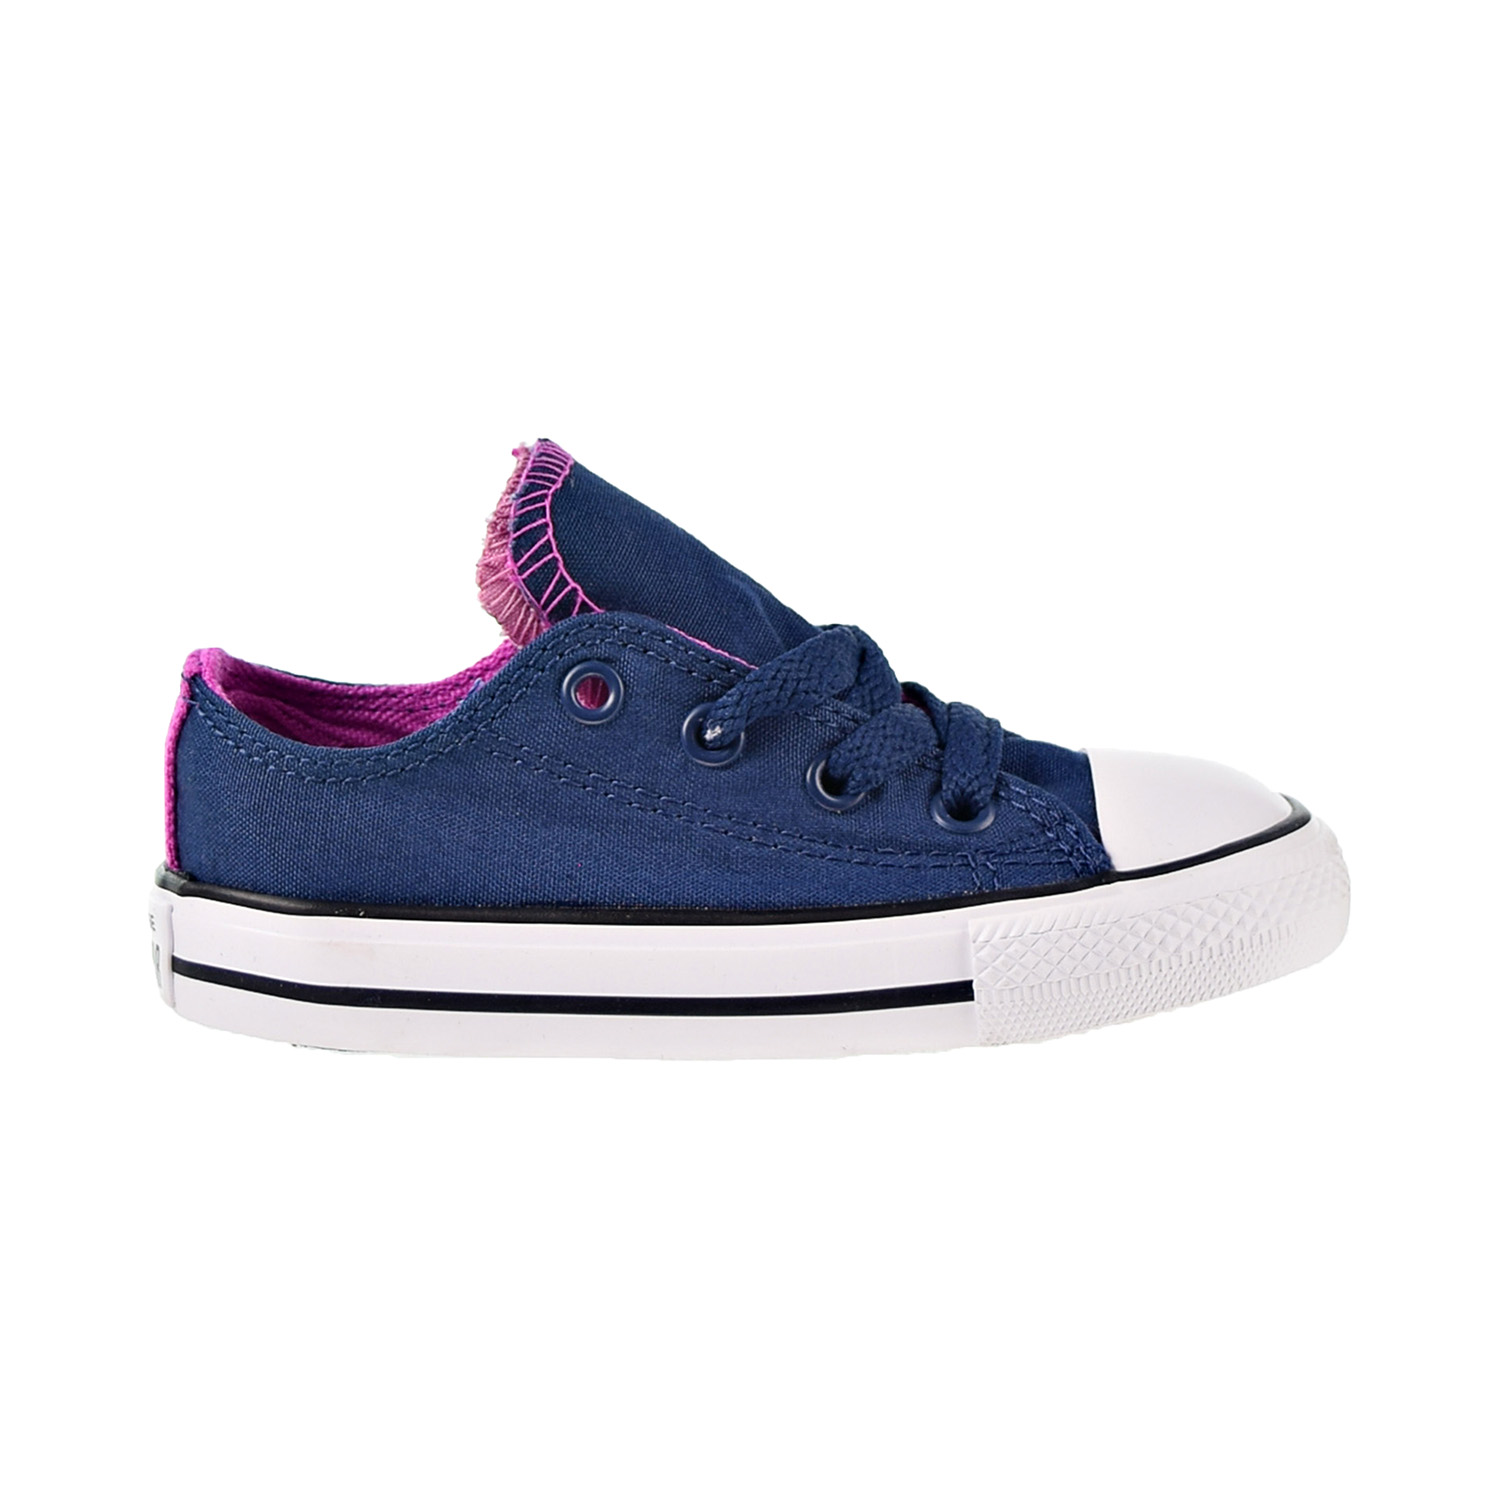 Converse Chuck Taylor All Star Double Toddler OX Toddler's Shoes Navy 760001f - image 1 of 6